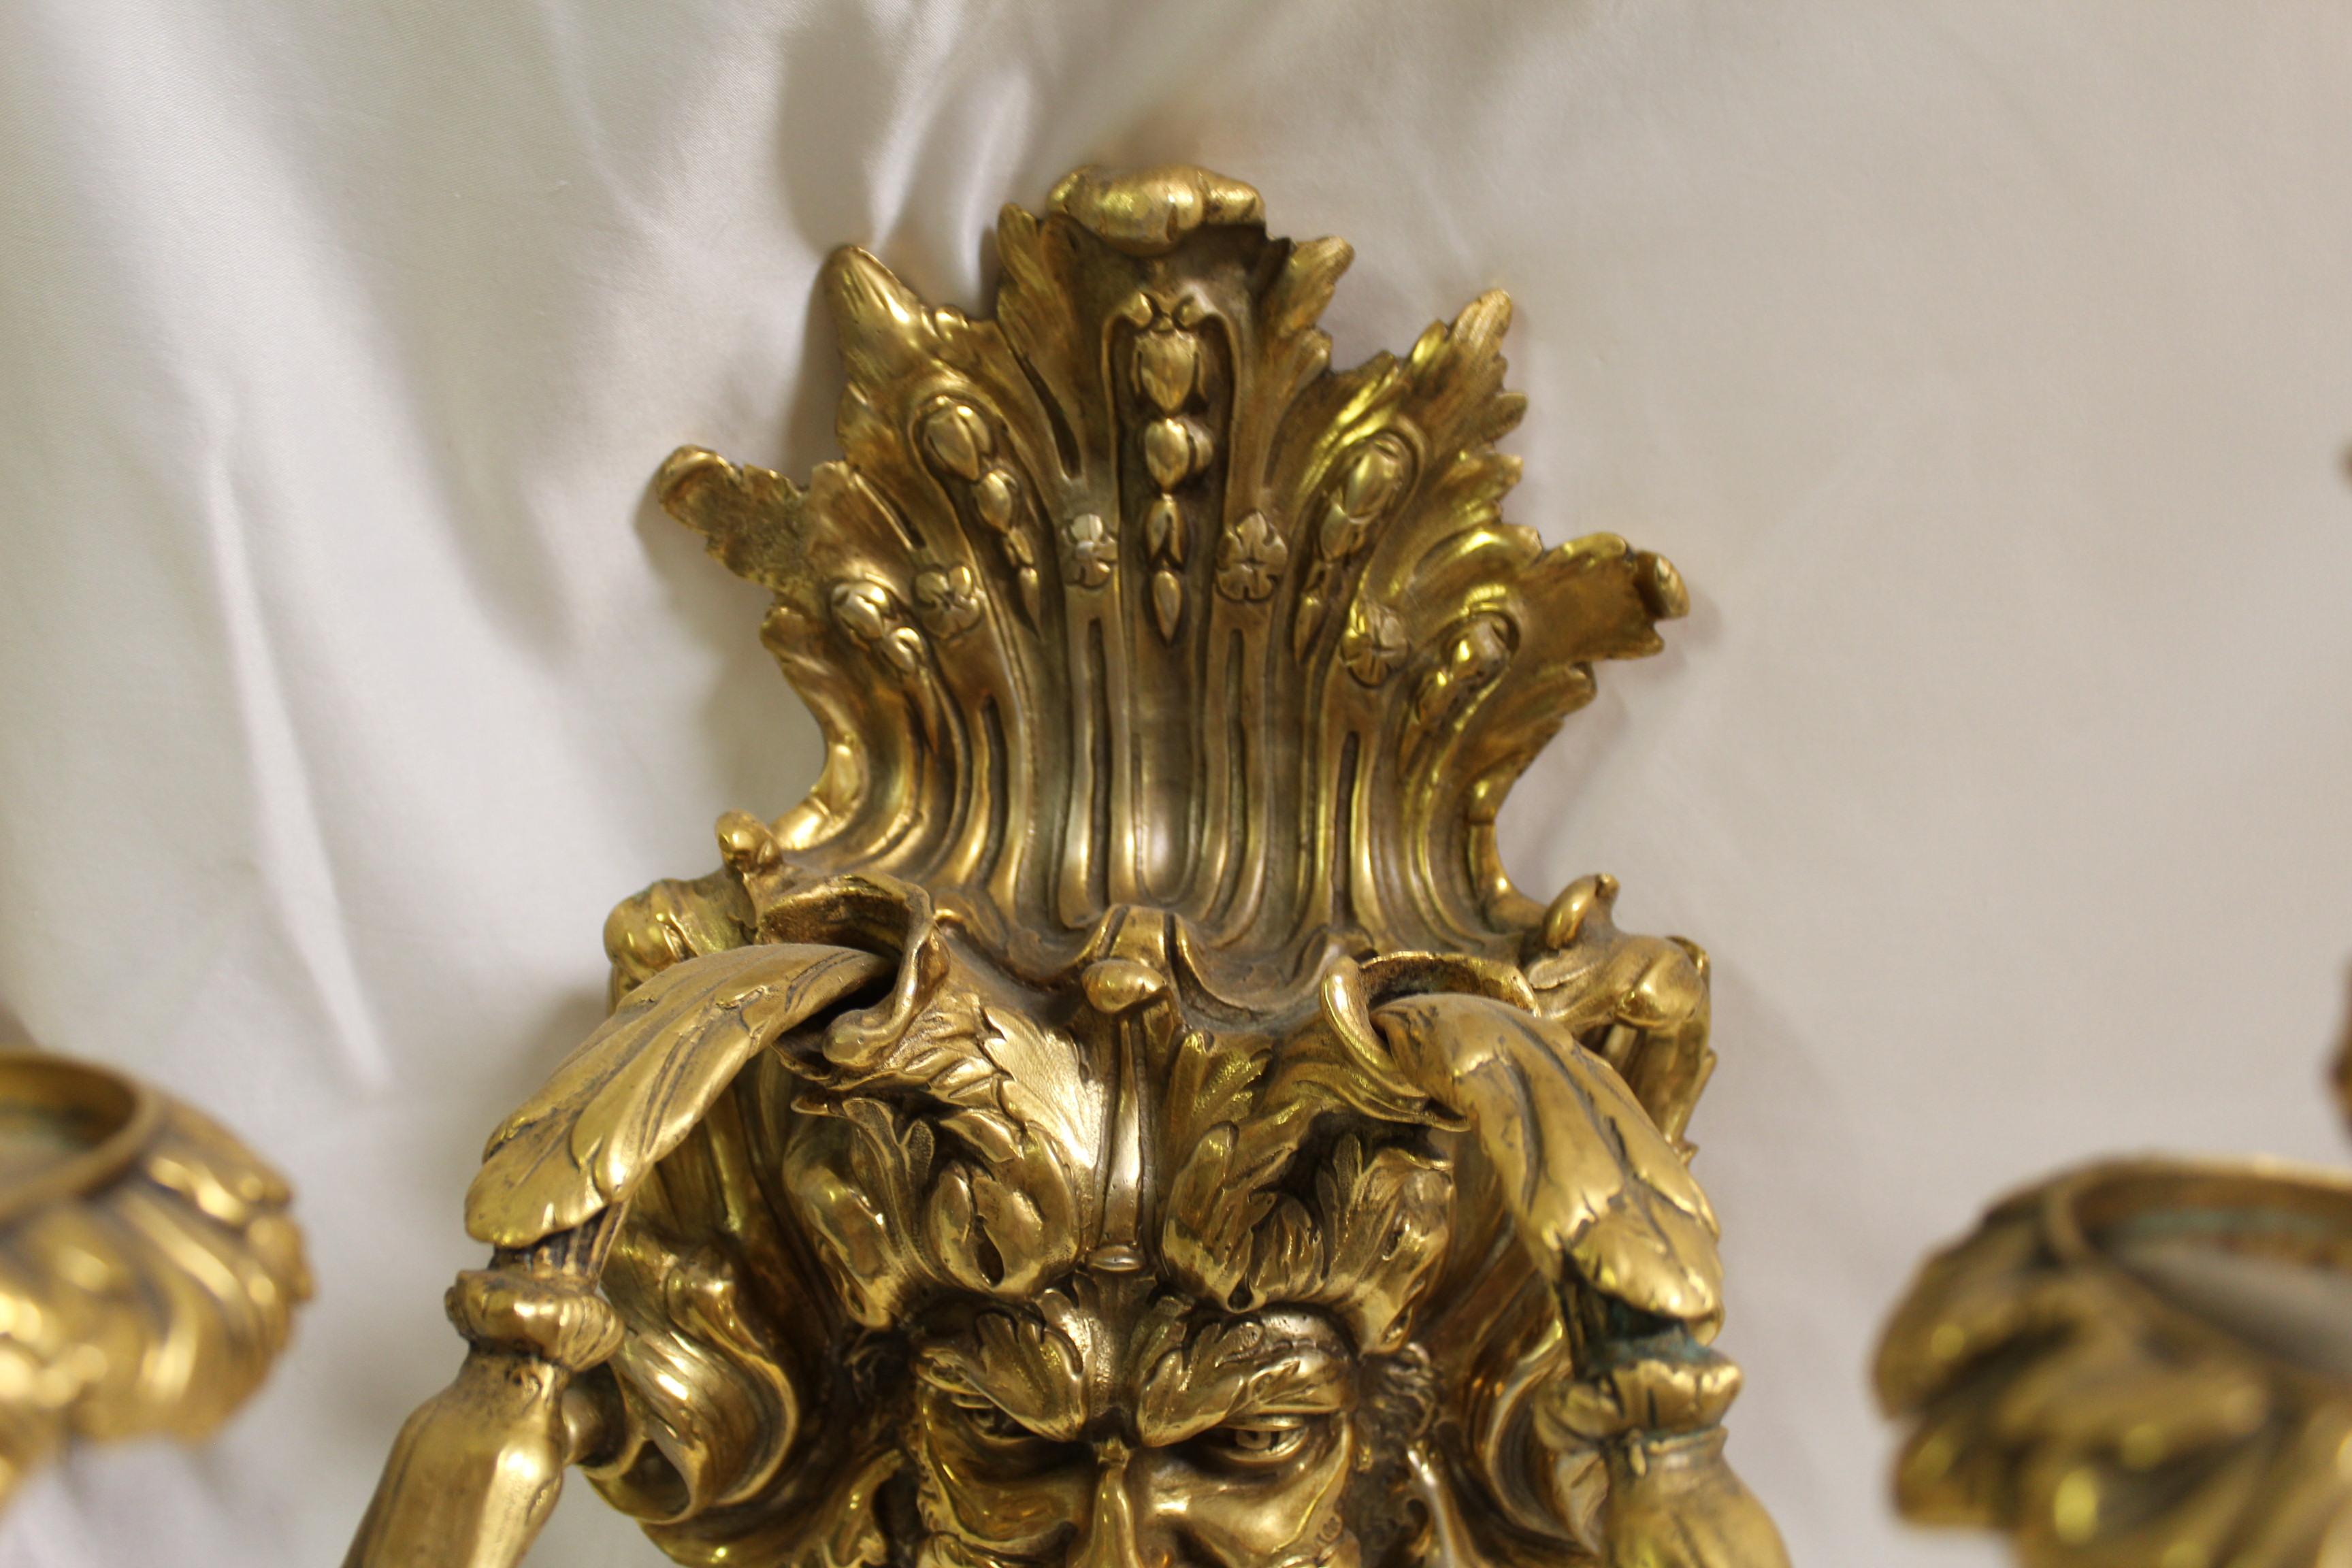 A rare find of these sconces. Came from Europe and are Contemporary cast in bronze with hi-light Gold plating finish. They are for candles and only had a hook on the back for hanging. These are the last pair around and were showroom samples never